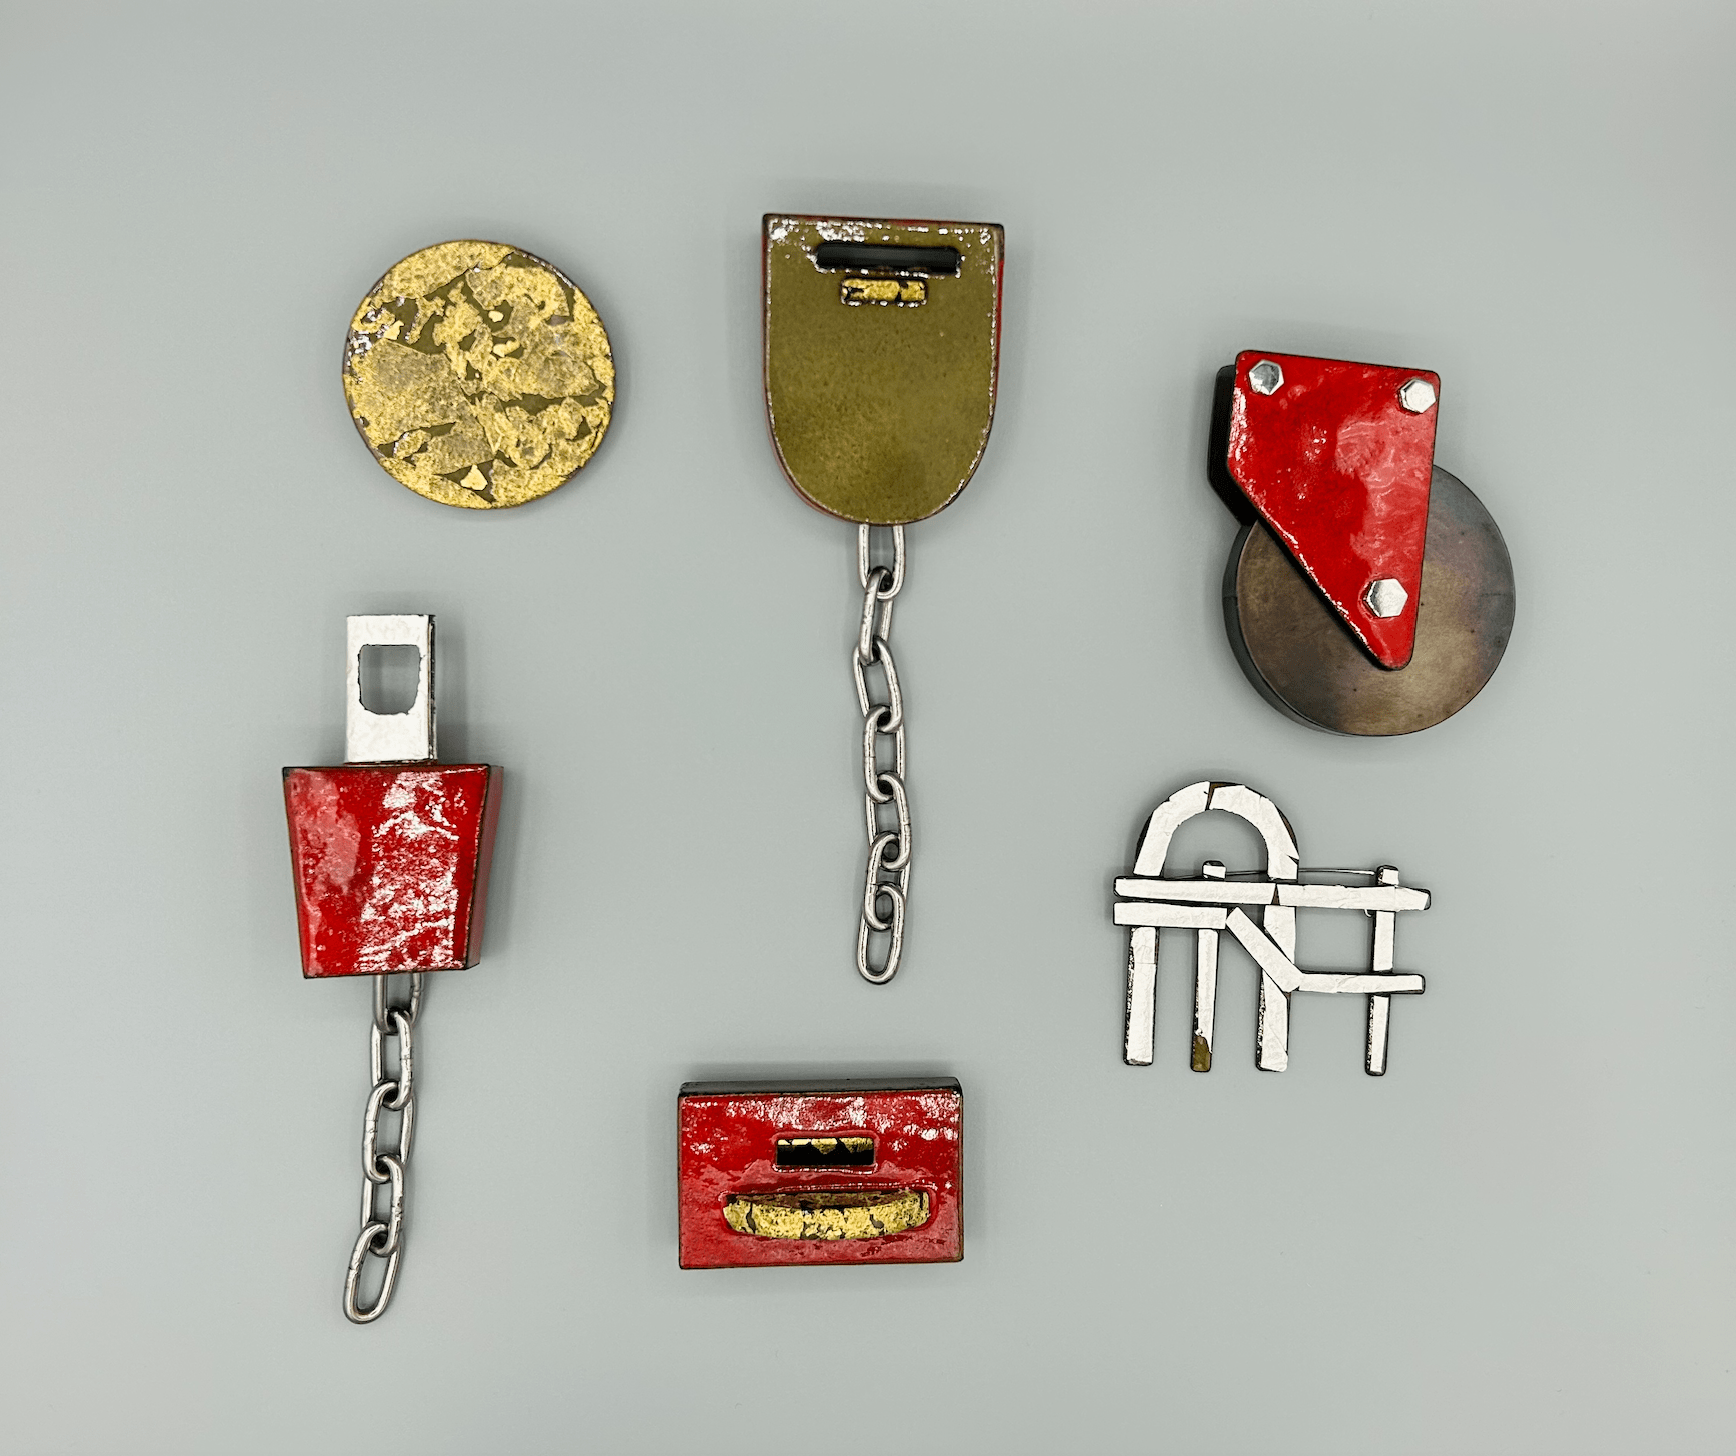 Beth Sanderson, ‘Trolley Bits’ 2023, series of six brooches, mild steel, vitreous enamel, stainless steel, sterling silver, gold foil, largest 17.5 x 5 x 2.5cm